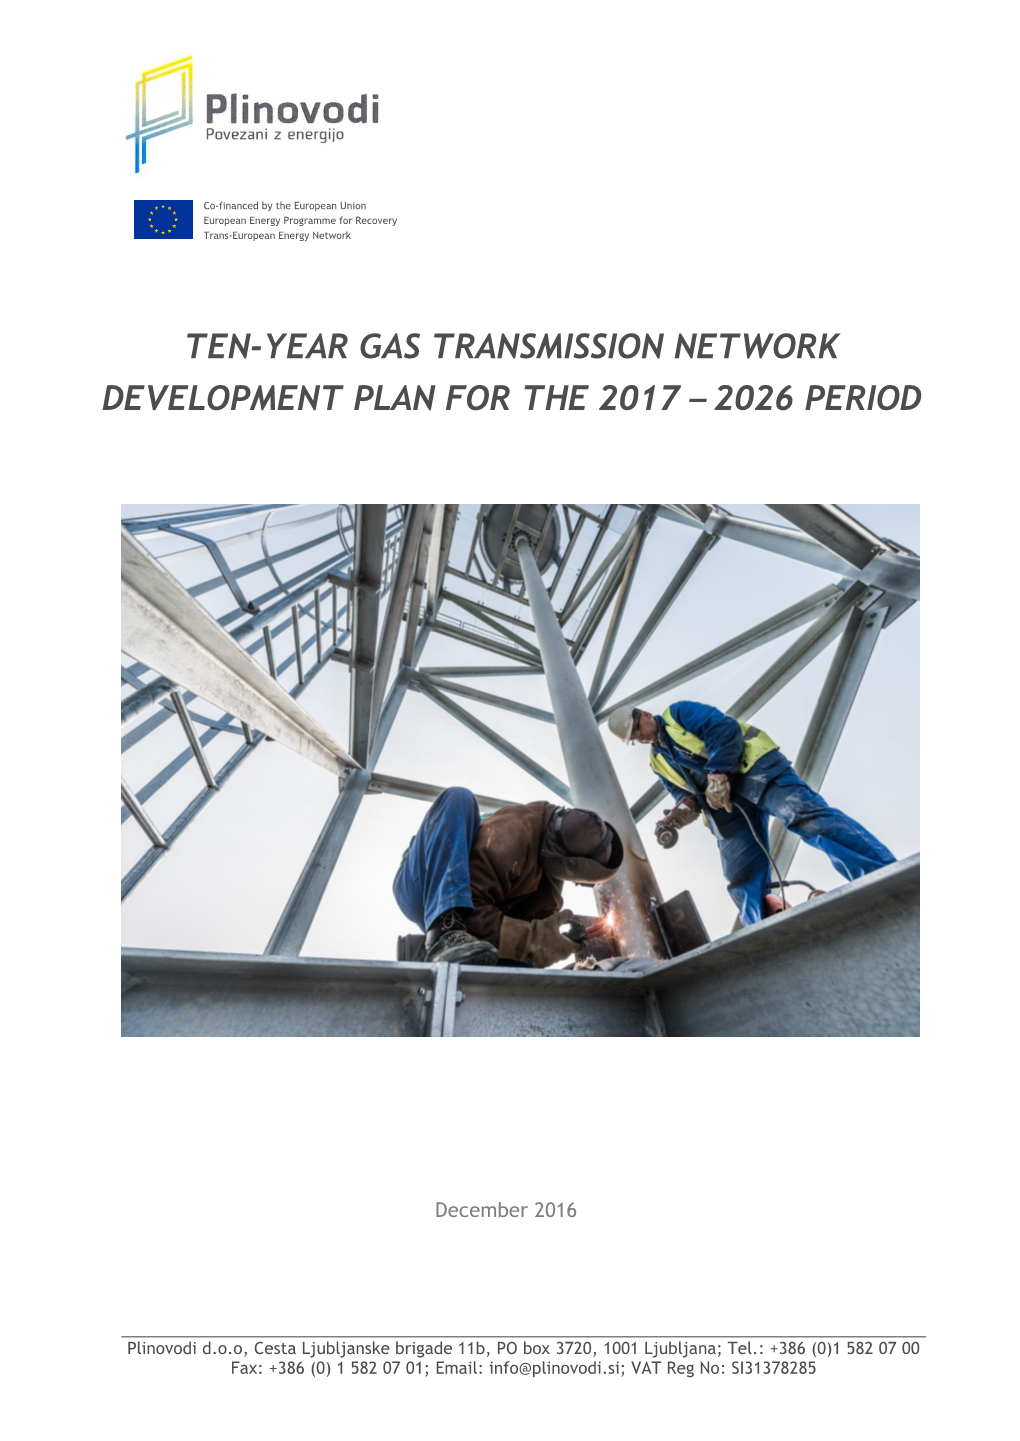 Ten-Year Gas Transmission Network Development Plan for the 2017 – 2026 Period